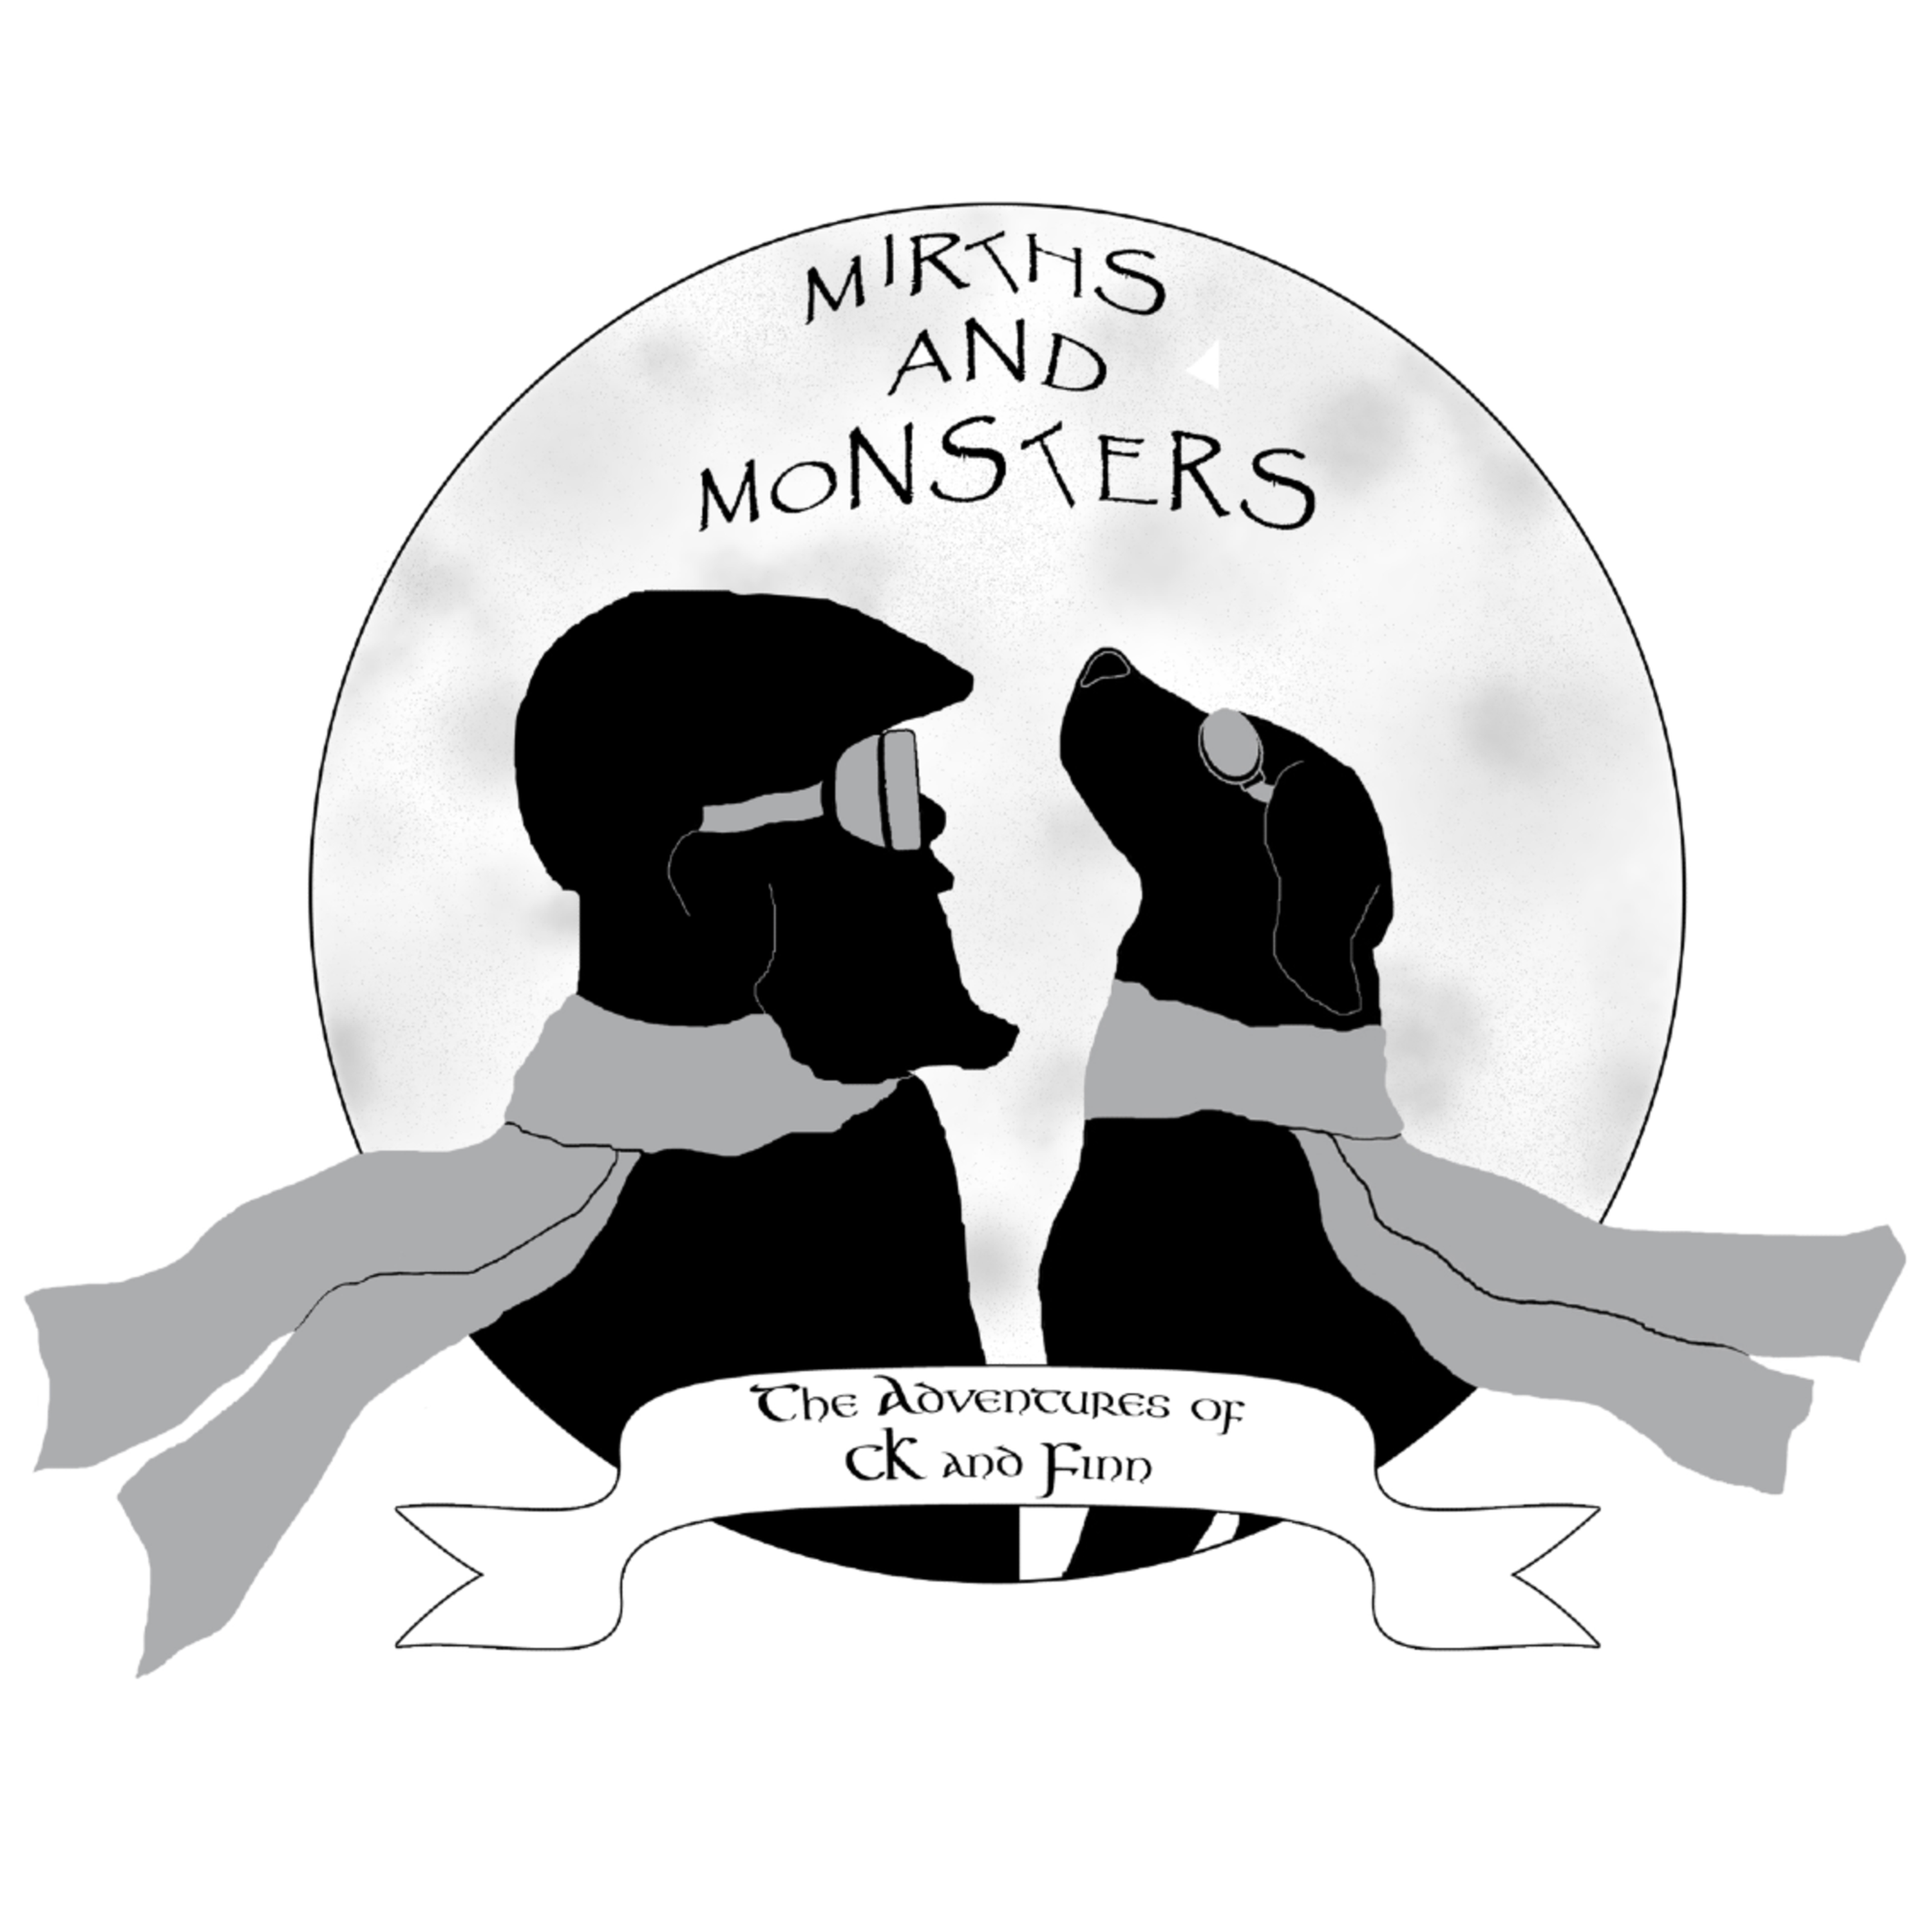 Mirths and Monsters-The Winchester House part 1